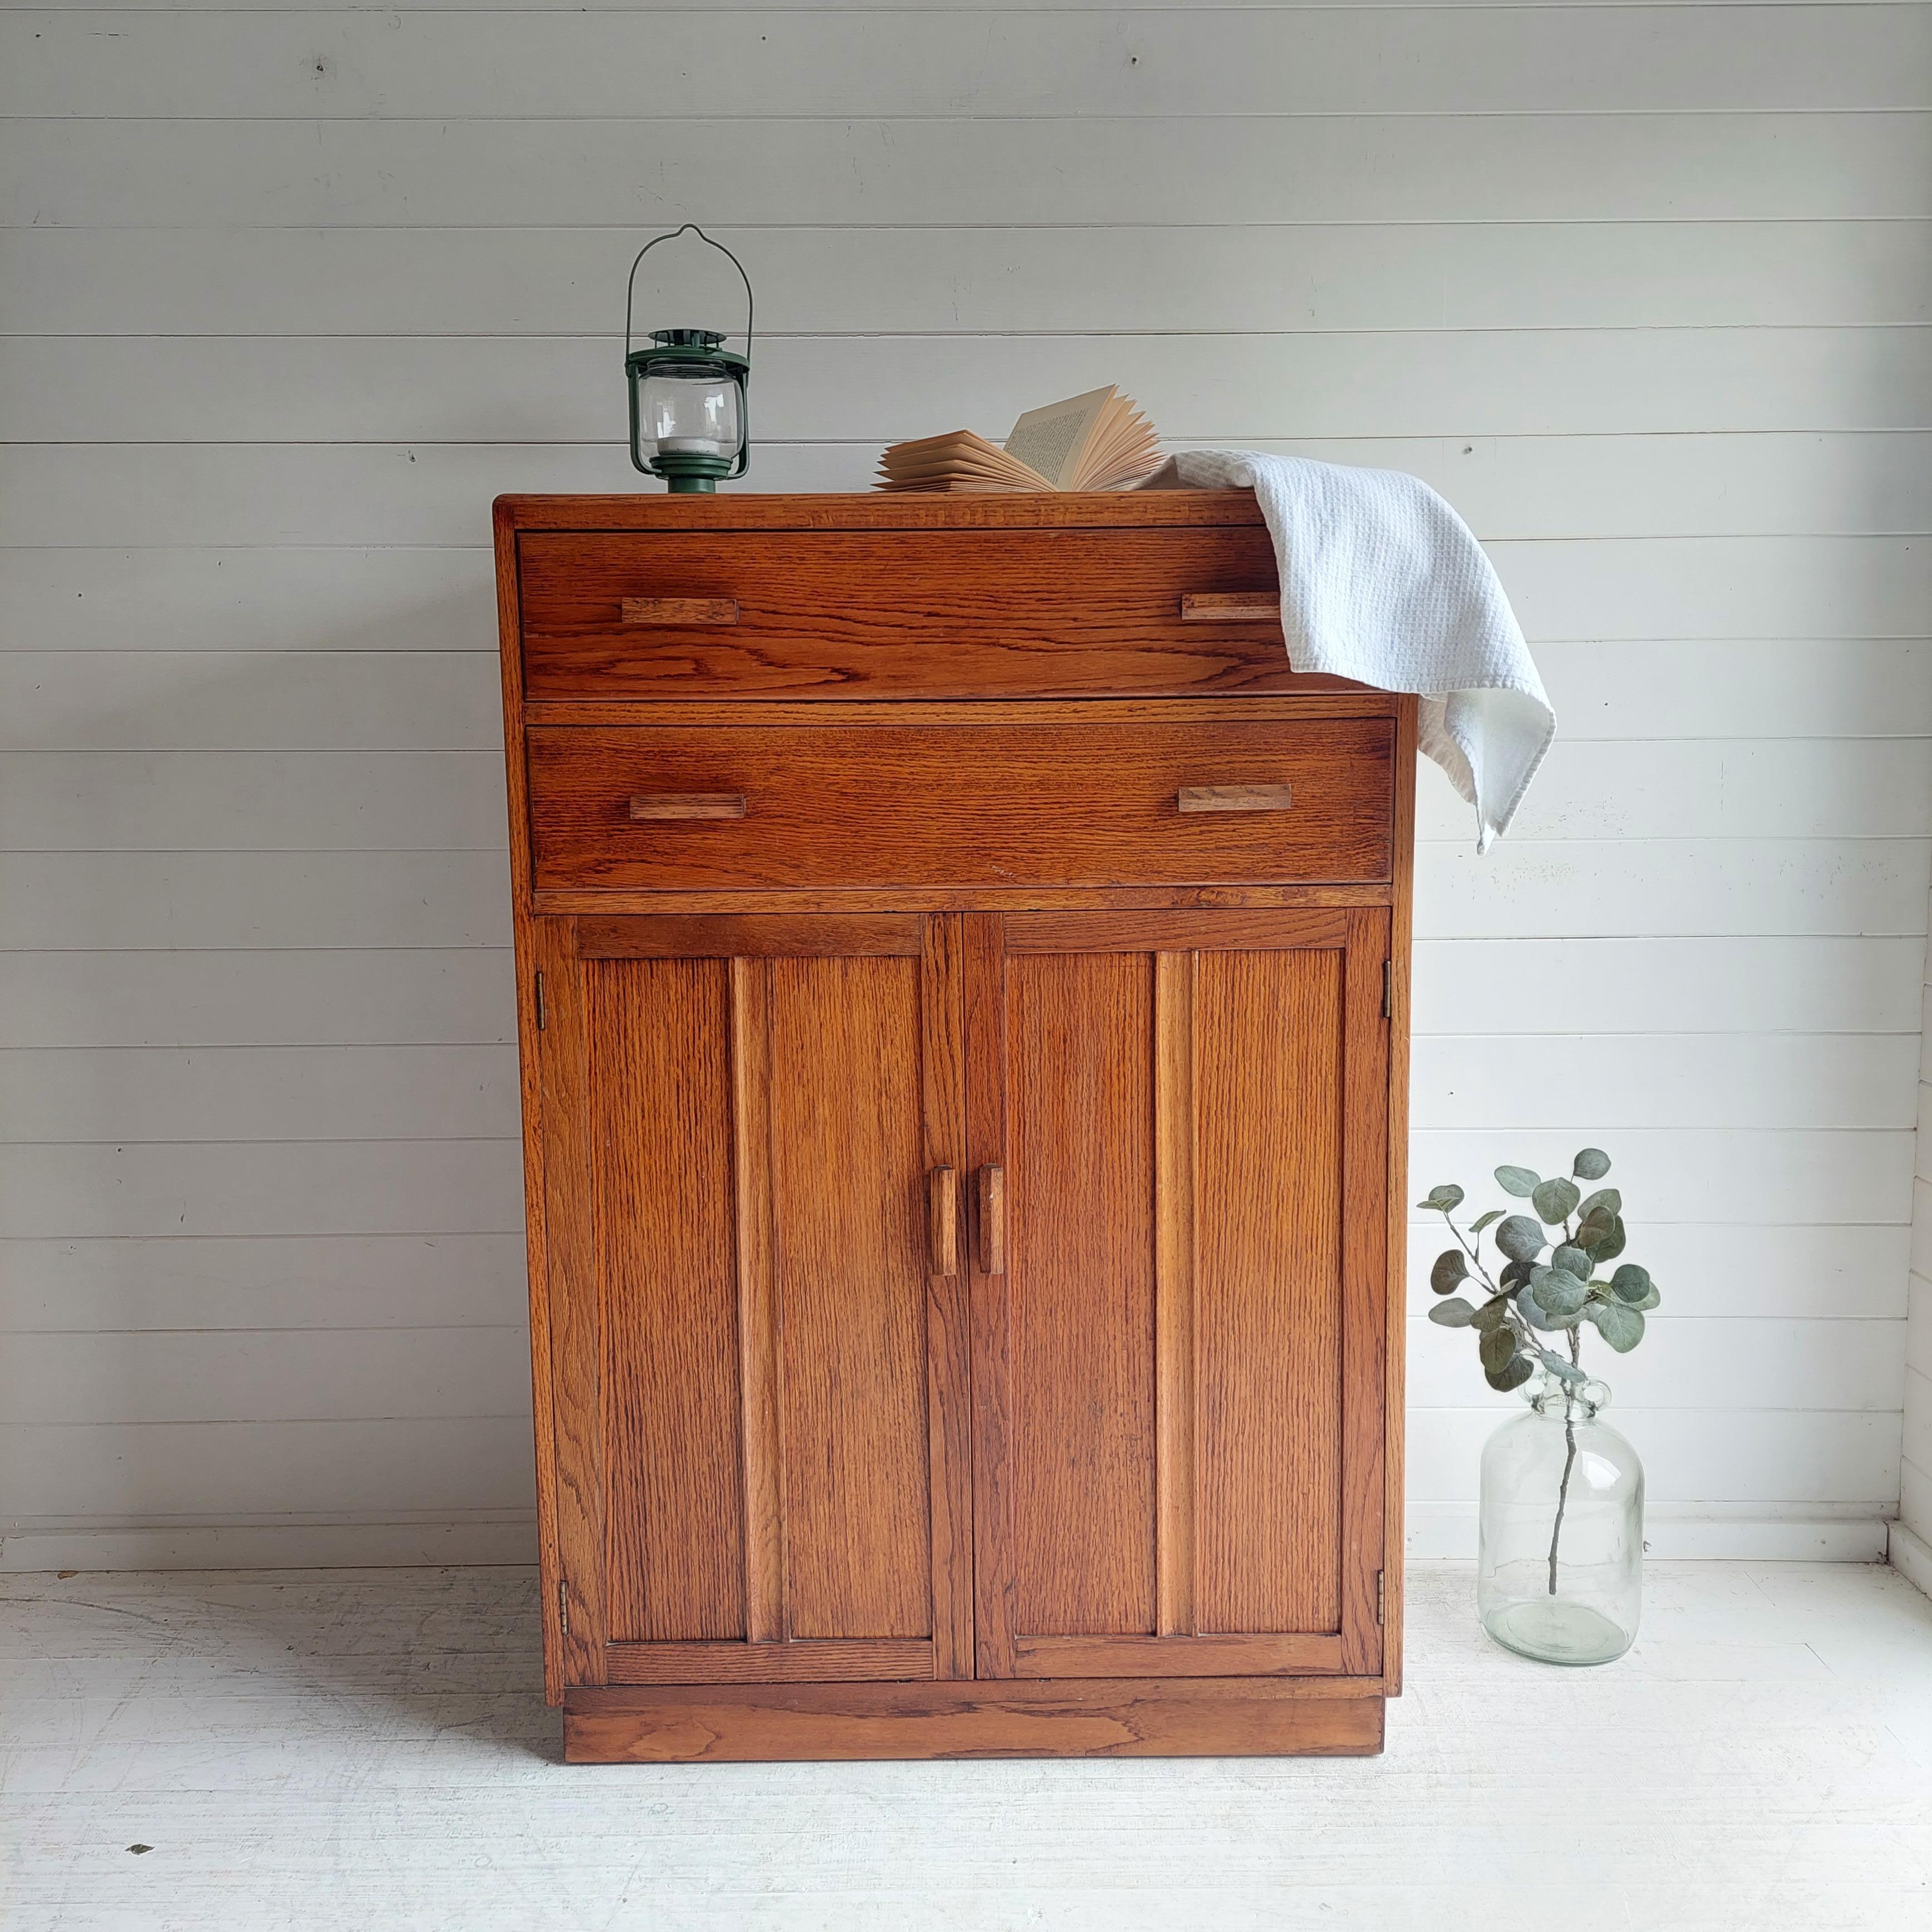 A gorgeous, oak shelved storage cupboard.
A modest piece of oak furniture by the Utility Furniture Advisory Committee. 
Late art Deco early mid century period
1940s
​
The Utility Furniture Advisory Committee set up in 1942, drawing on considerable